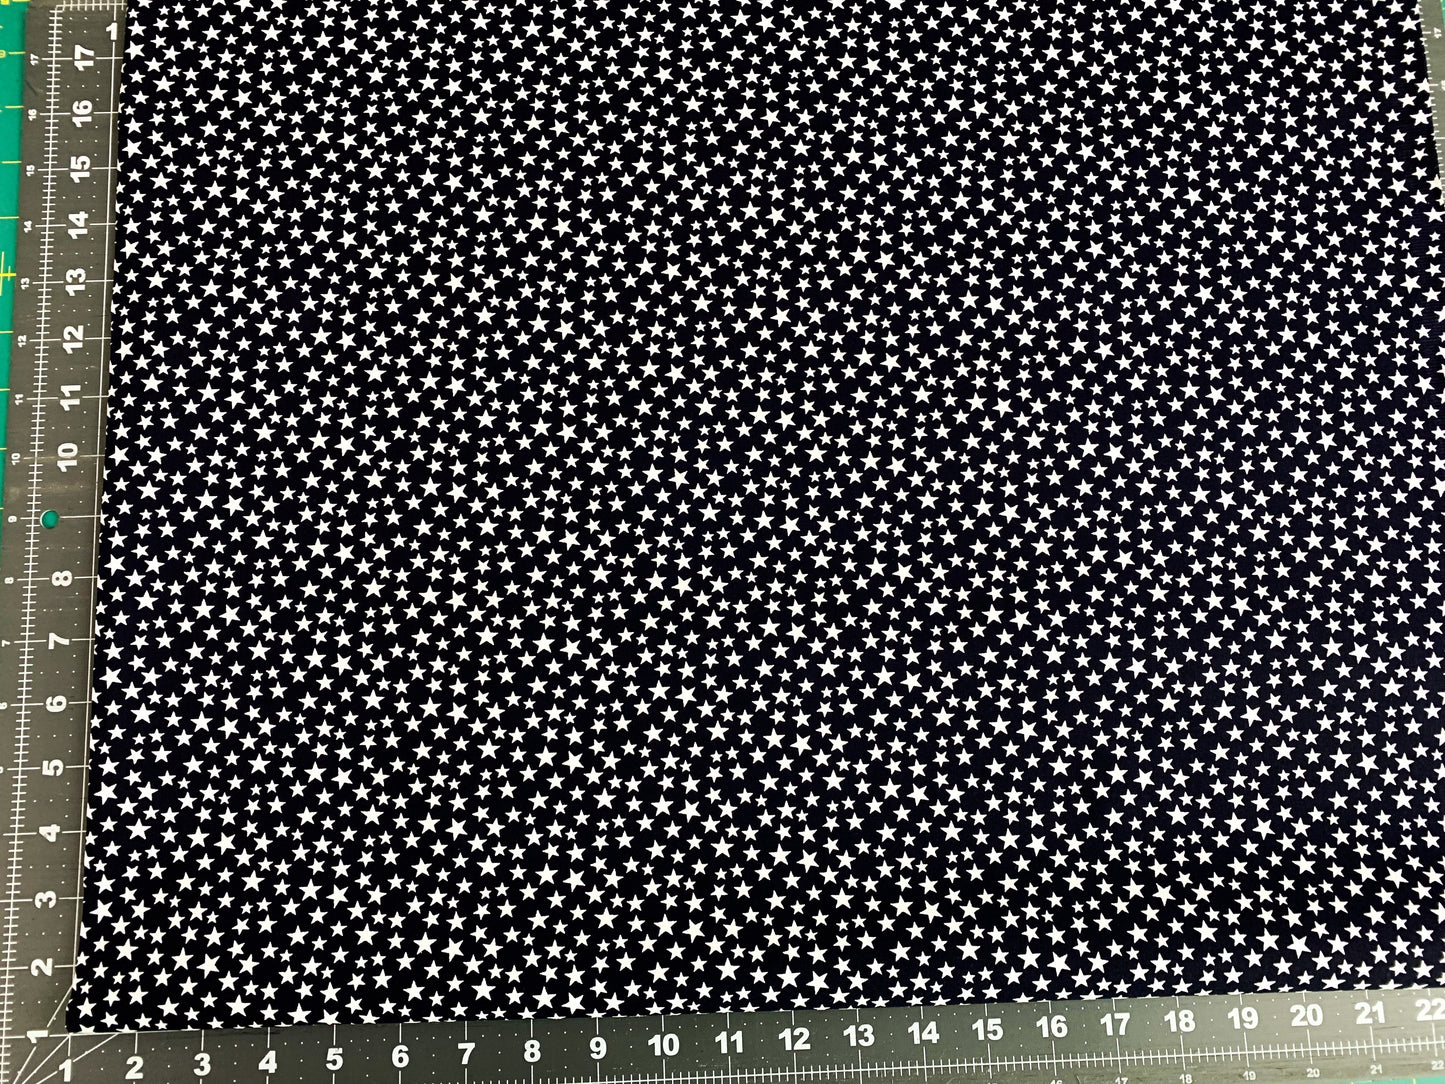 Navy Blue White Star USA fabric 48488 Made in the USA